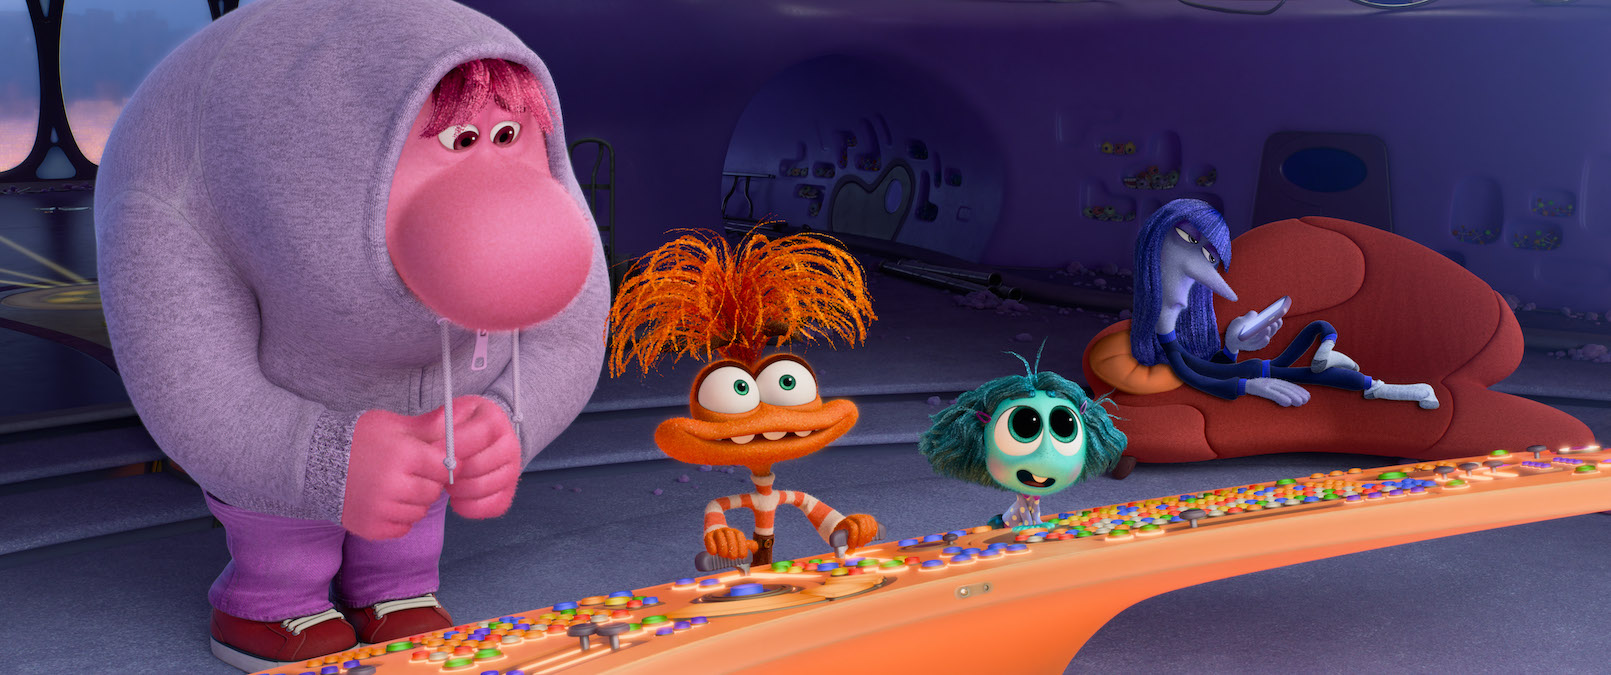 INSIDE OUT 2 Reveals New Trailer, Characters, and Voice Cast THE